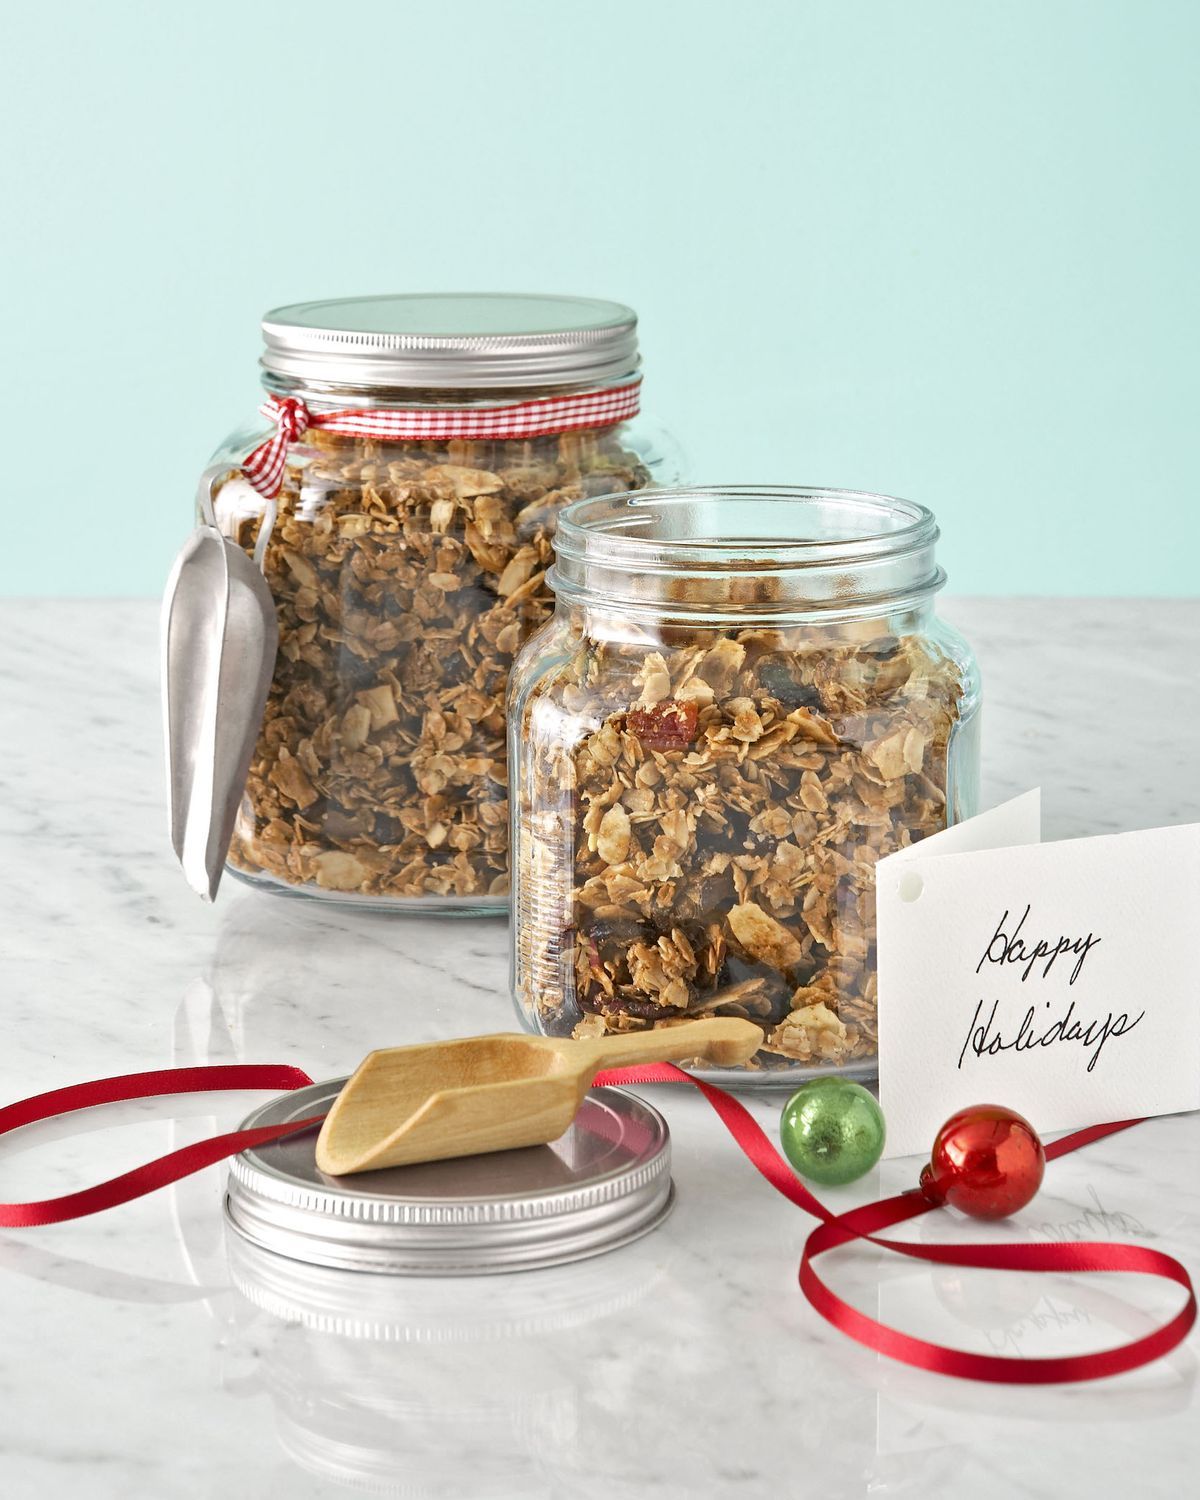 7 Thoughtful Gifts for Neighbors